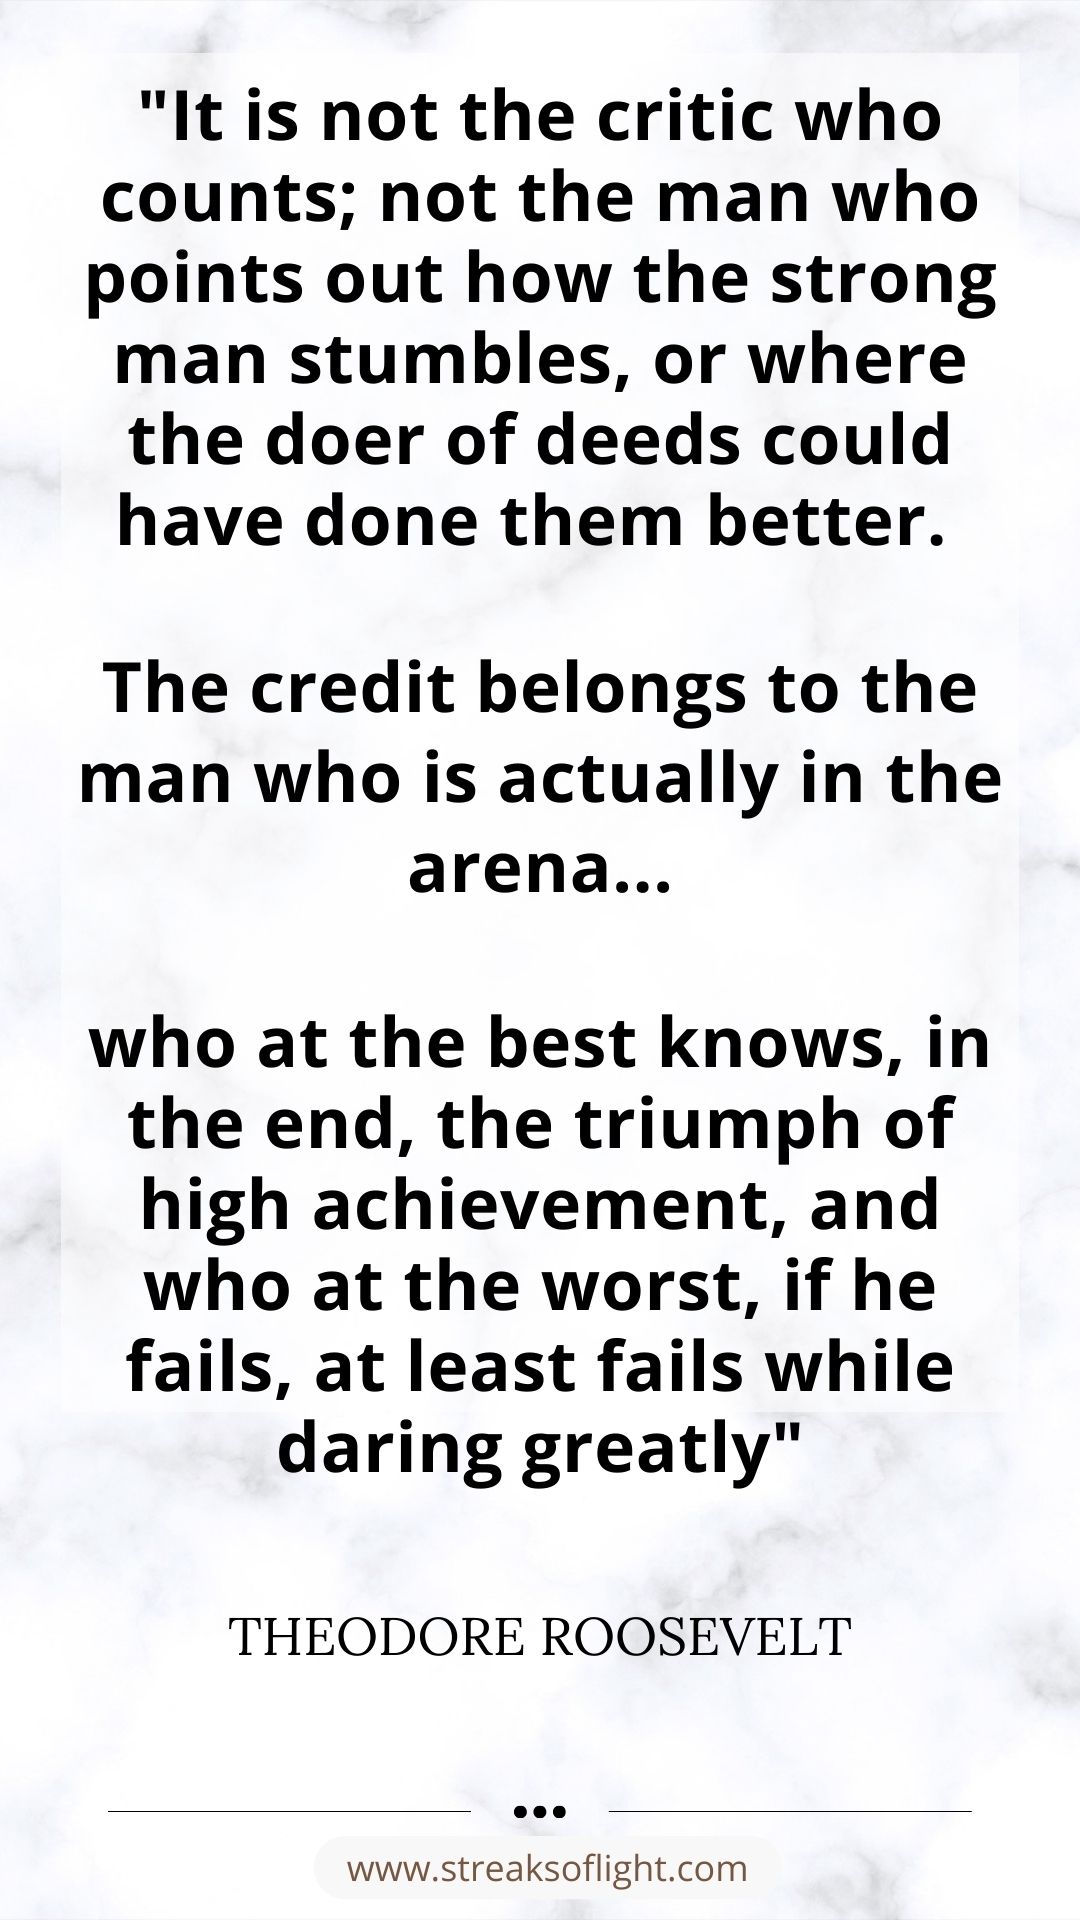 "It is not the critic who counts; not the man who points out how the strong man stumbles, or where the doer of deeds could have done them better. 

The credit belongs to the man who is actually in the arena...

who at the best knows, in the end, the triumph of high achievement, and who at the worst, if he fails, at least fails while daring greatly"  THEODORE ROOSEVELT quote